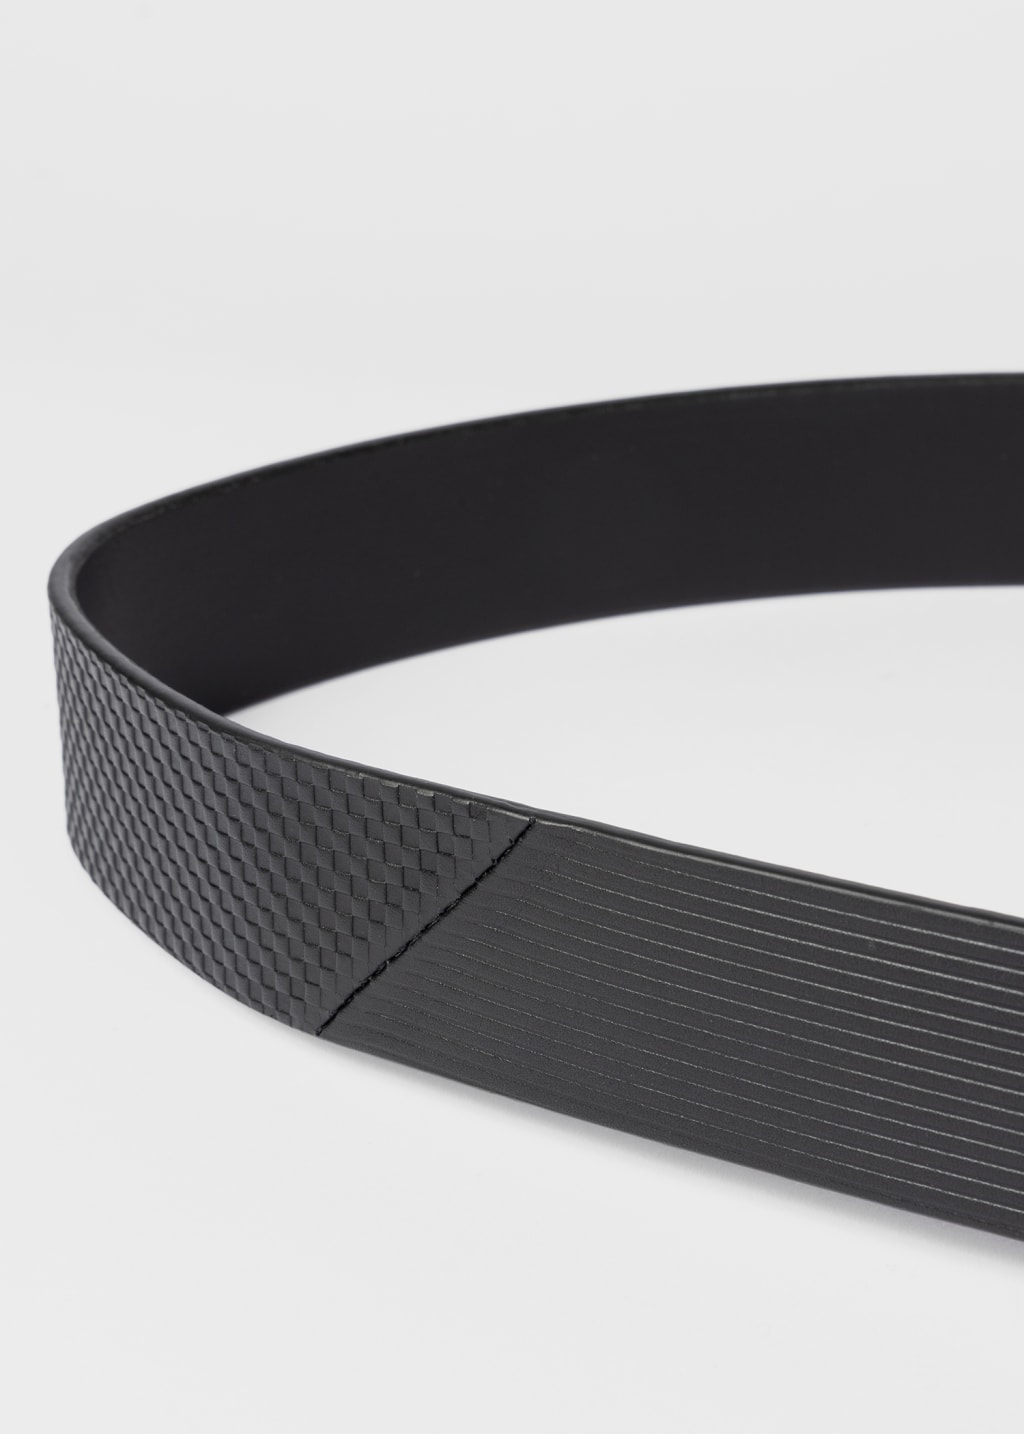 Product View - Black Leather Embossed Belt by Paul Smith